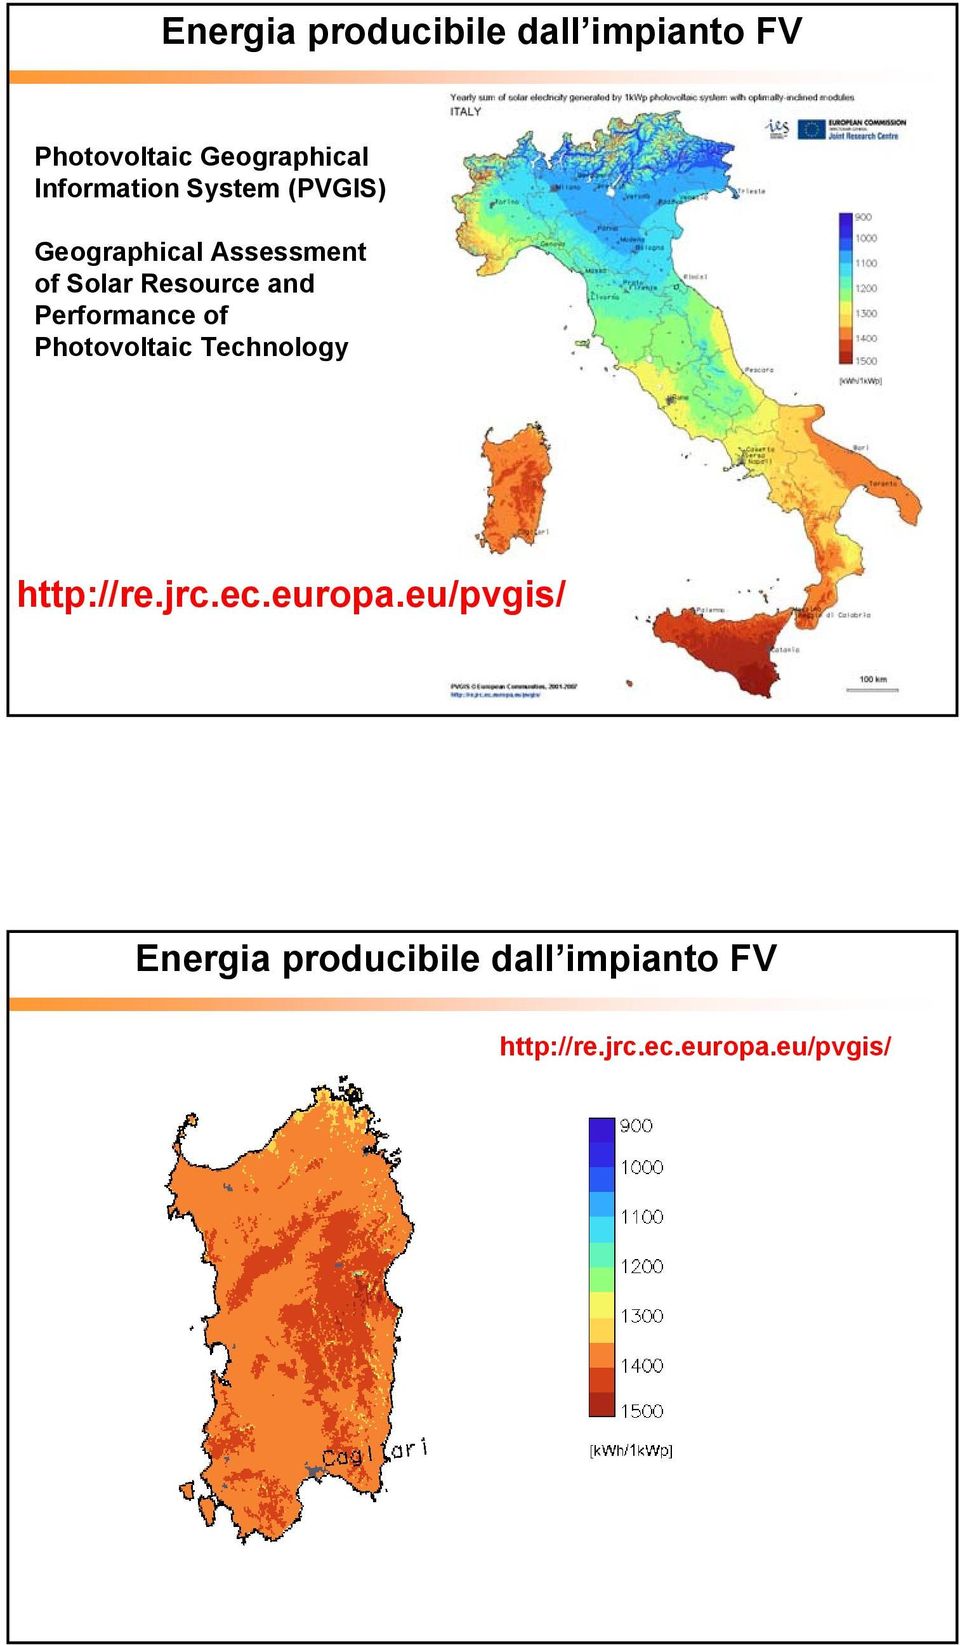 and Performance of Photovoltaic Technology http://re.jrc.ec.europa.